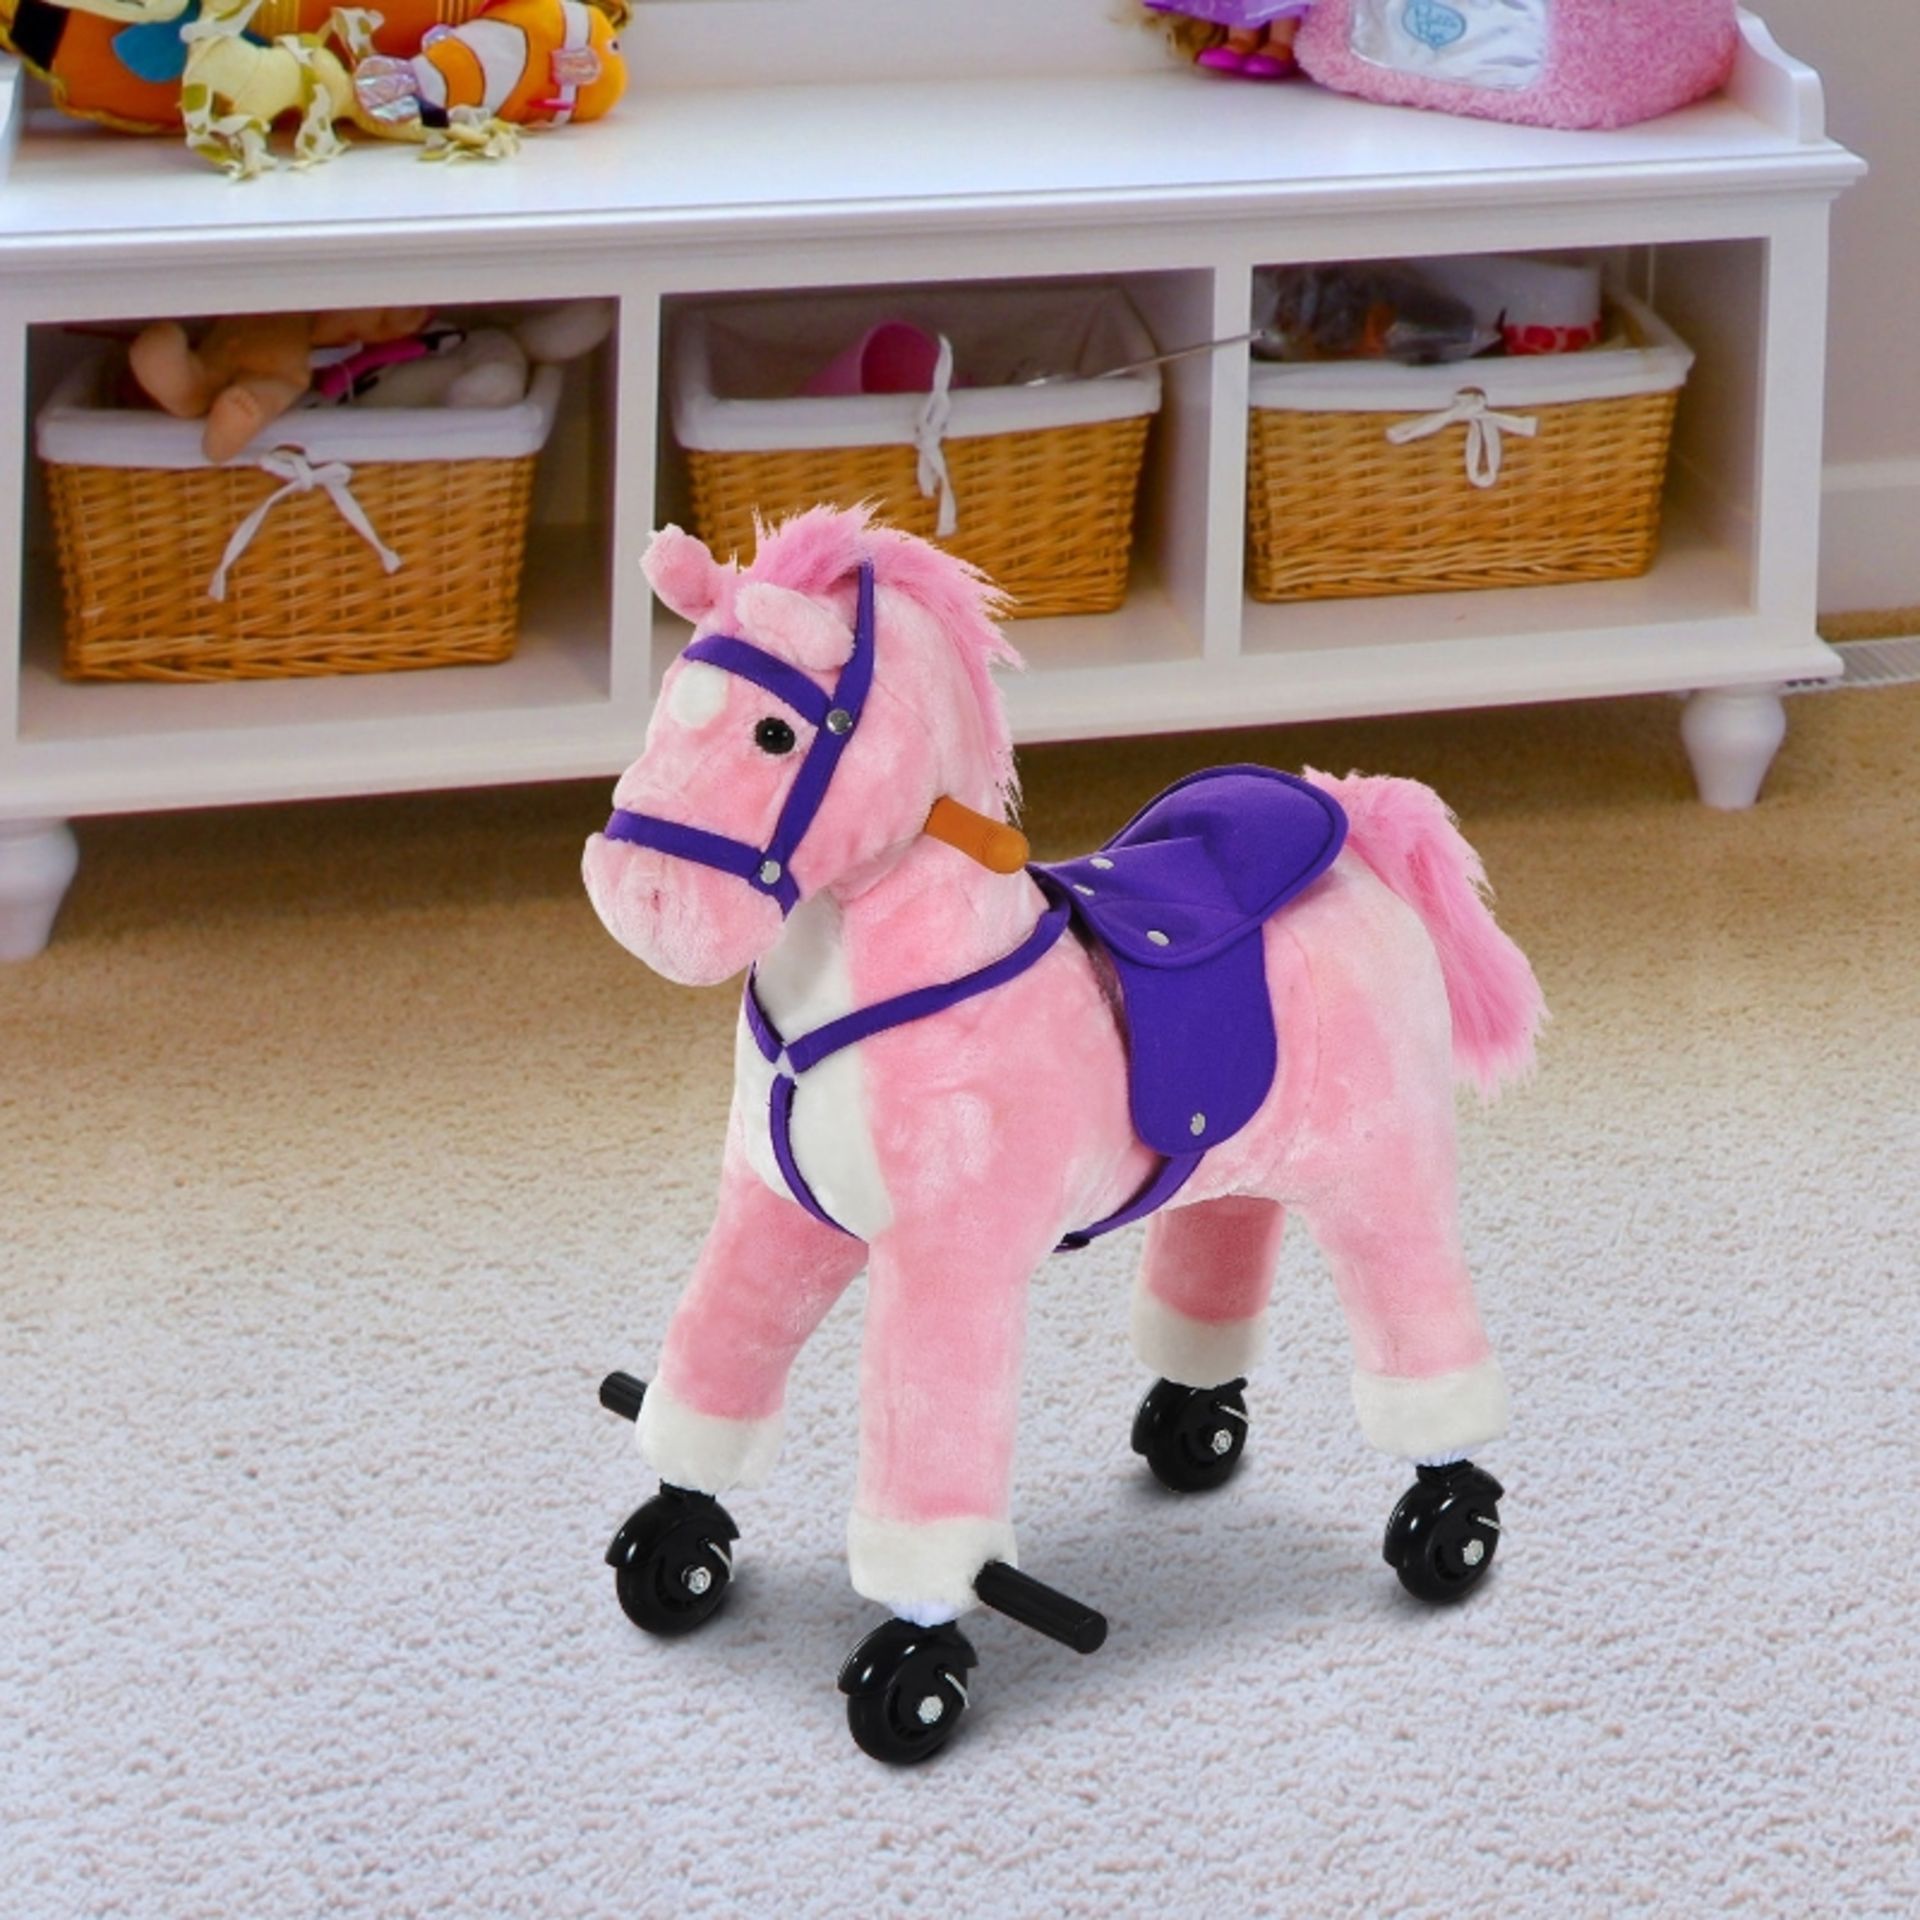 RPP £72.99 -HOMCOM Wooden Action Pony Wheeled Walking Horse Riding Little Baby Plush Toy Wooden